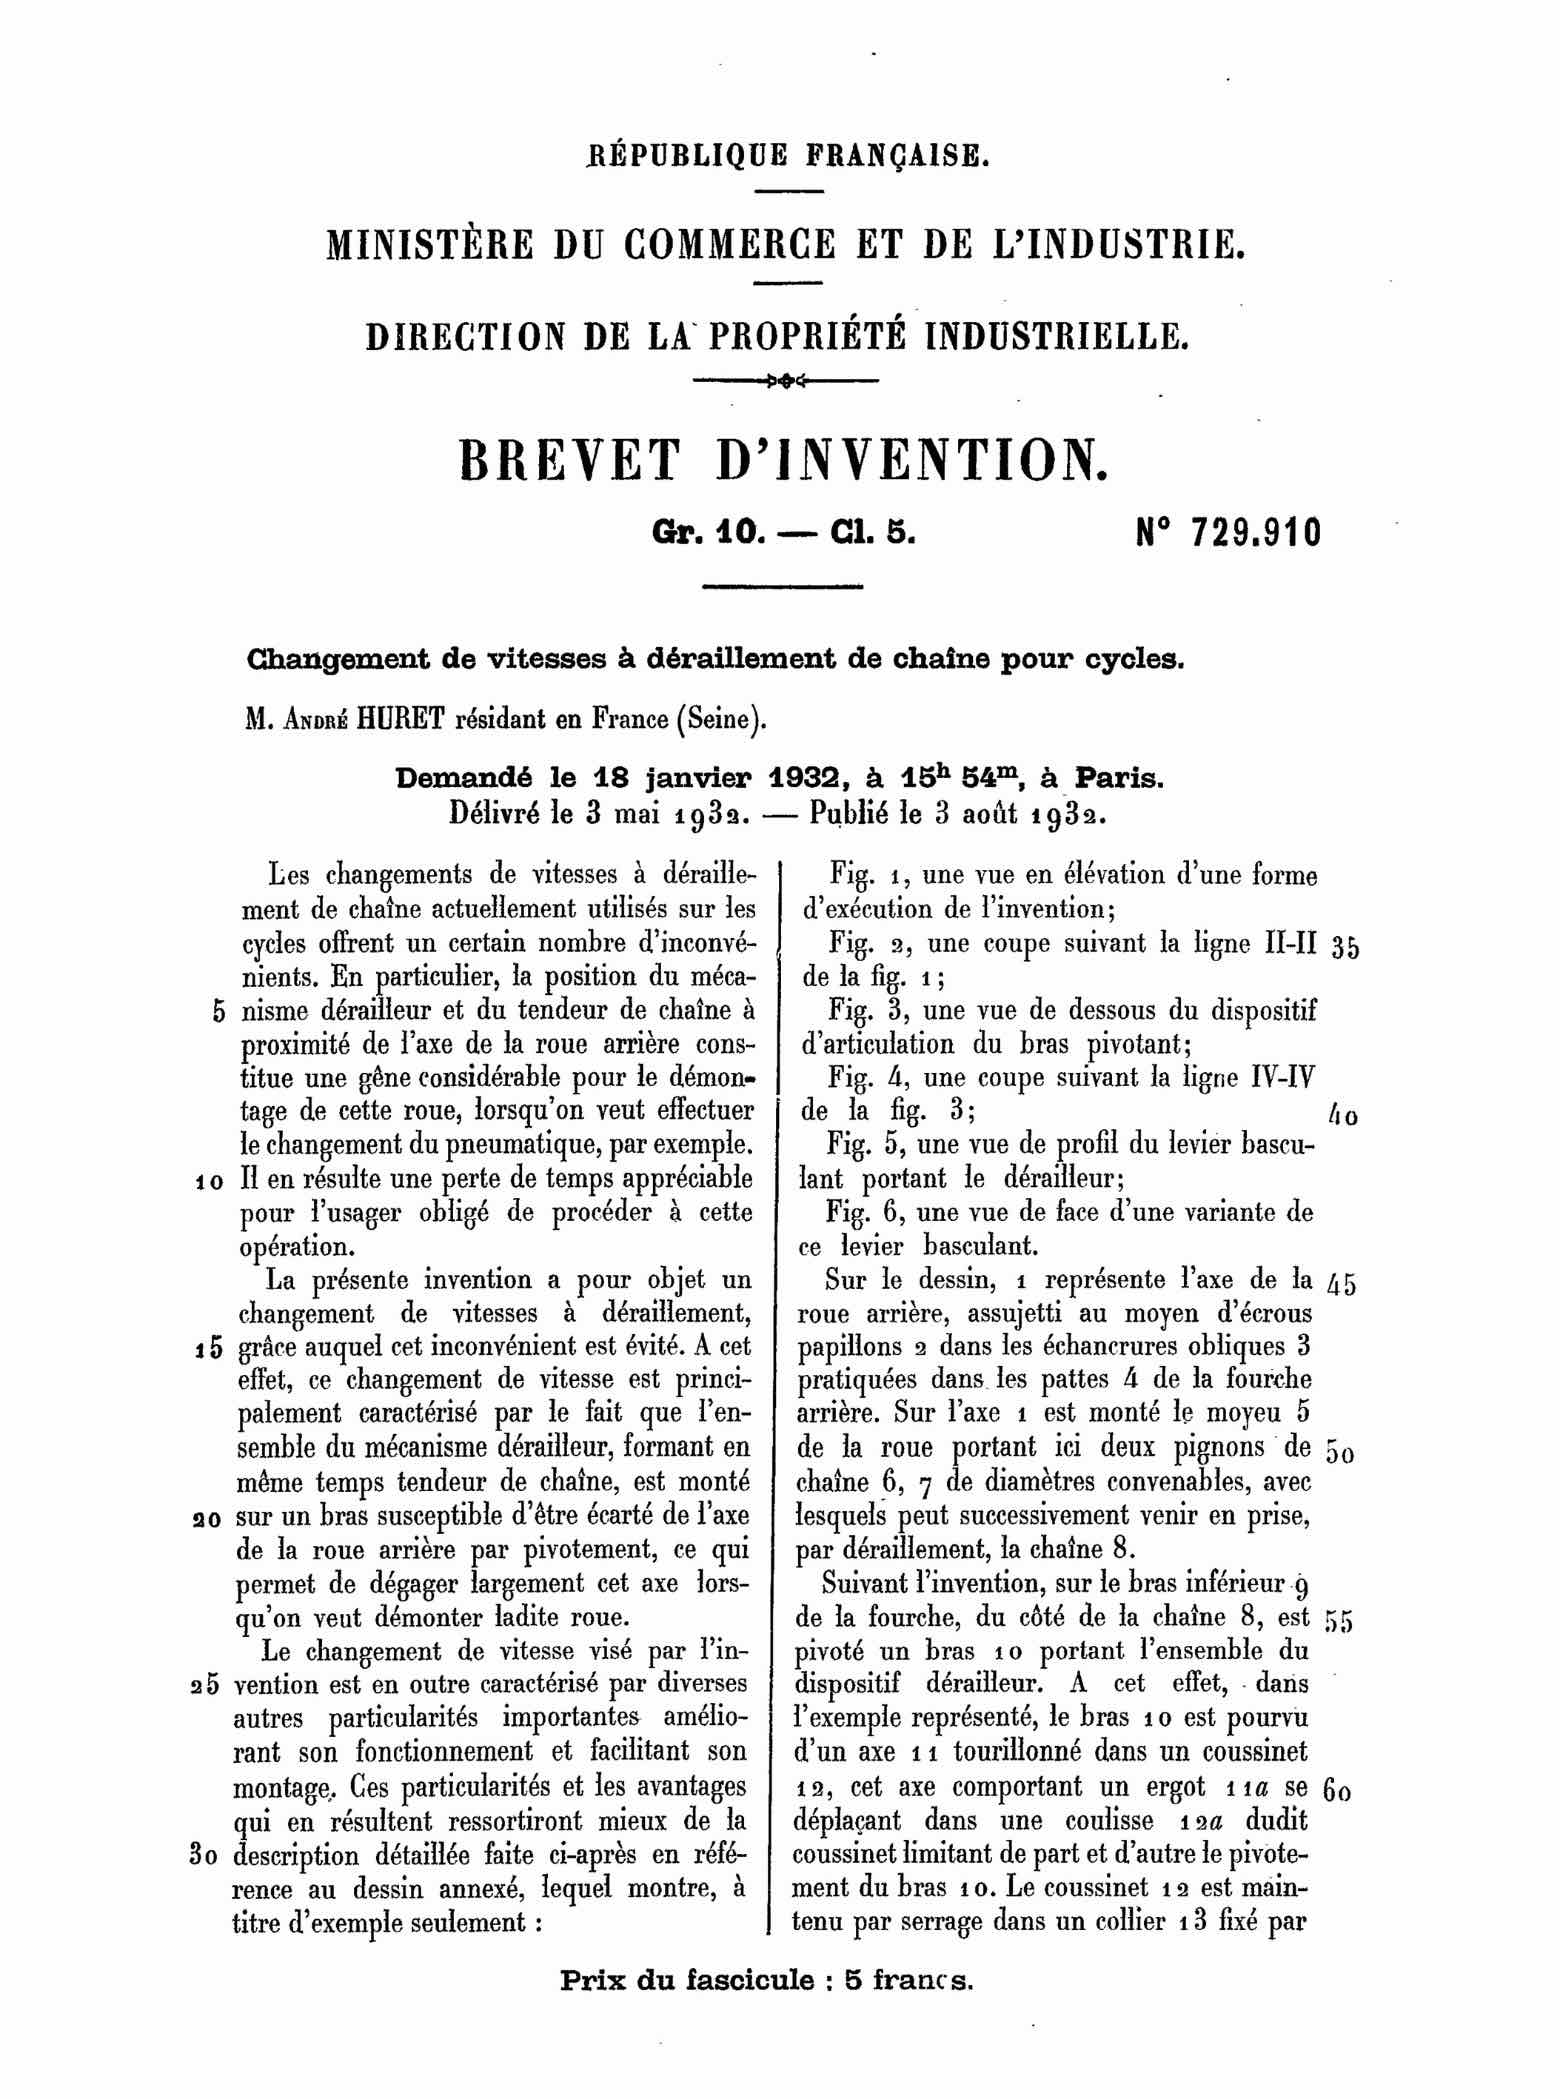 French Patent 729,910 - Huret scan 1 main image